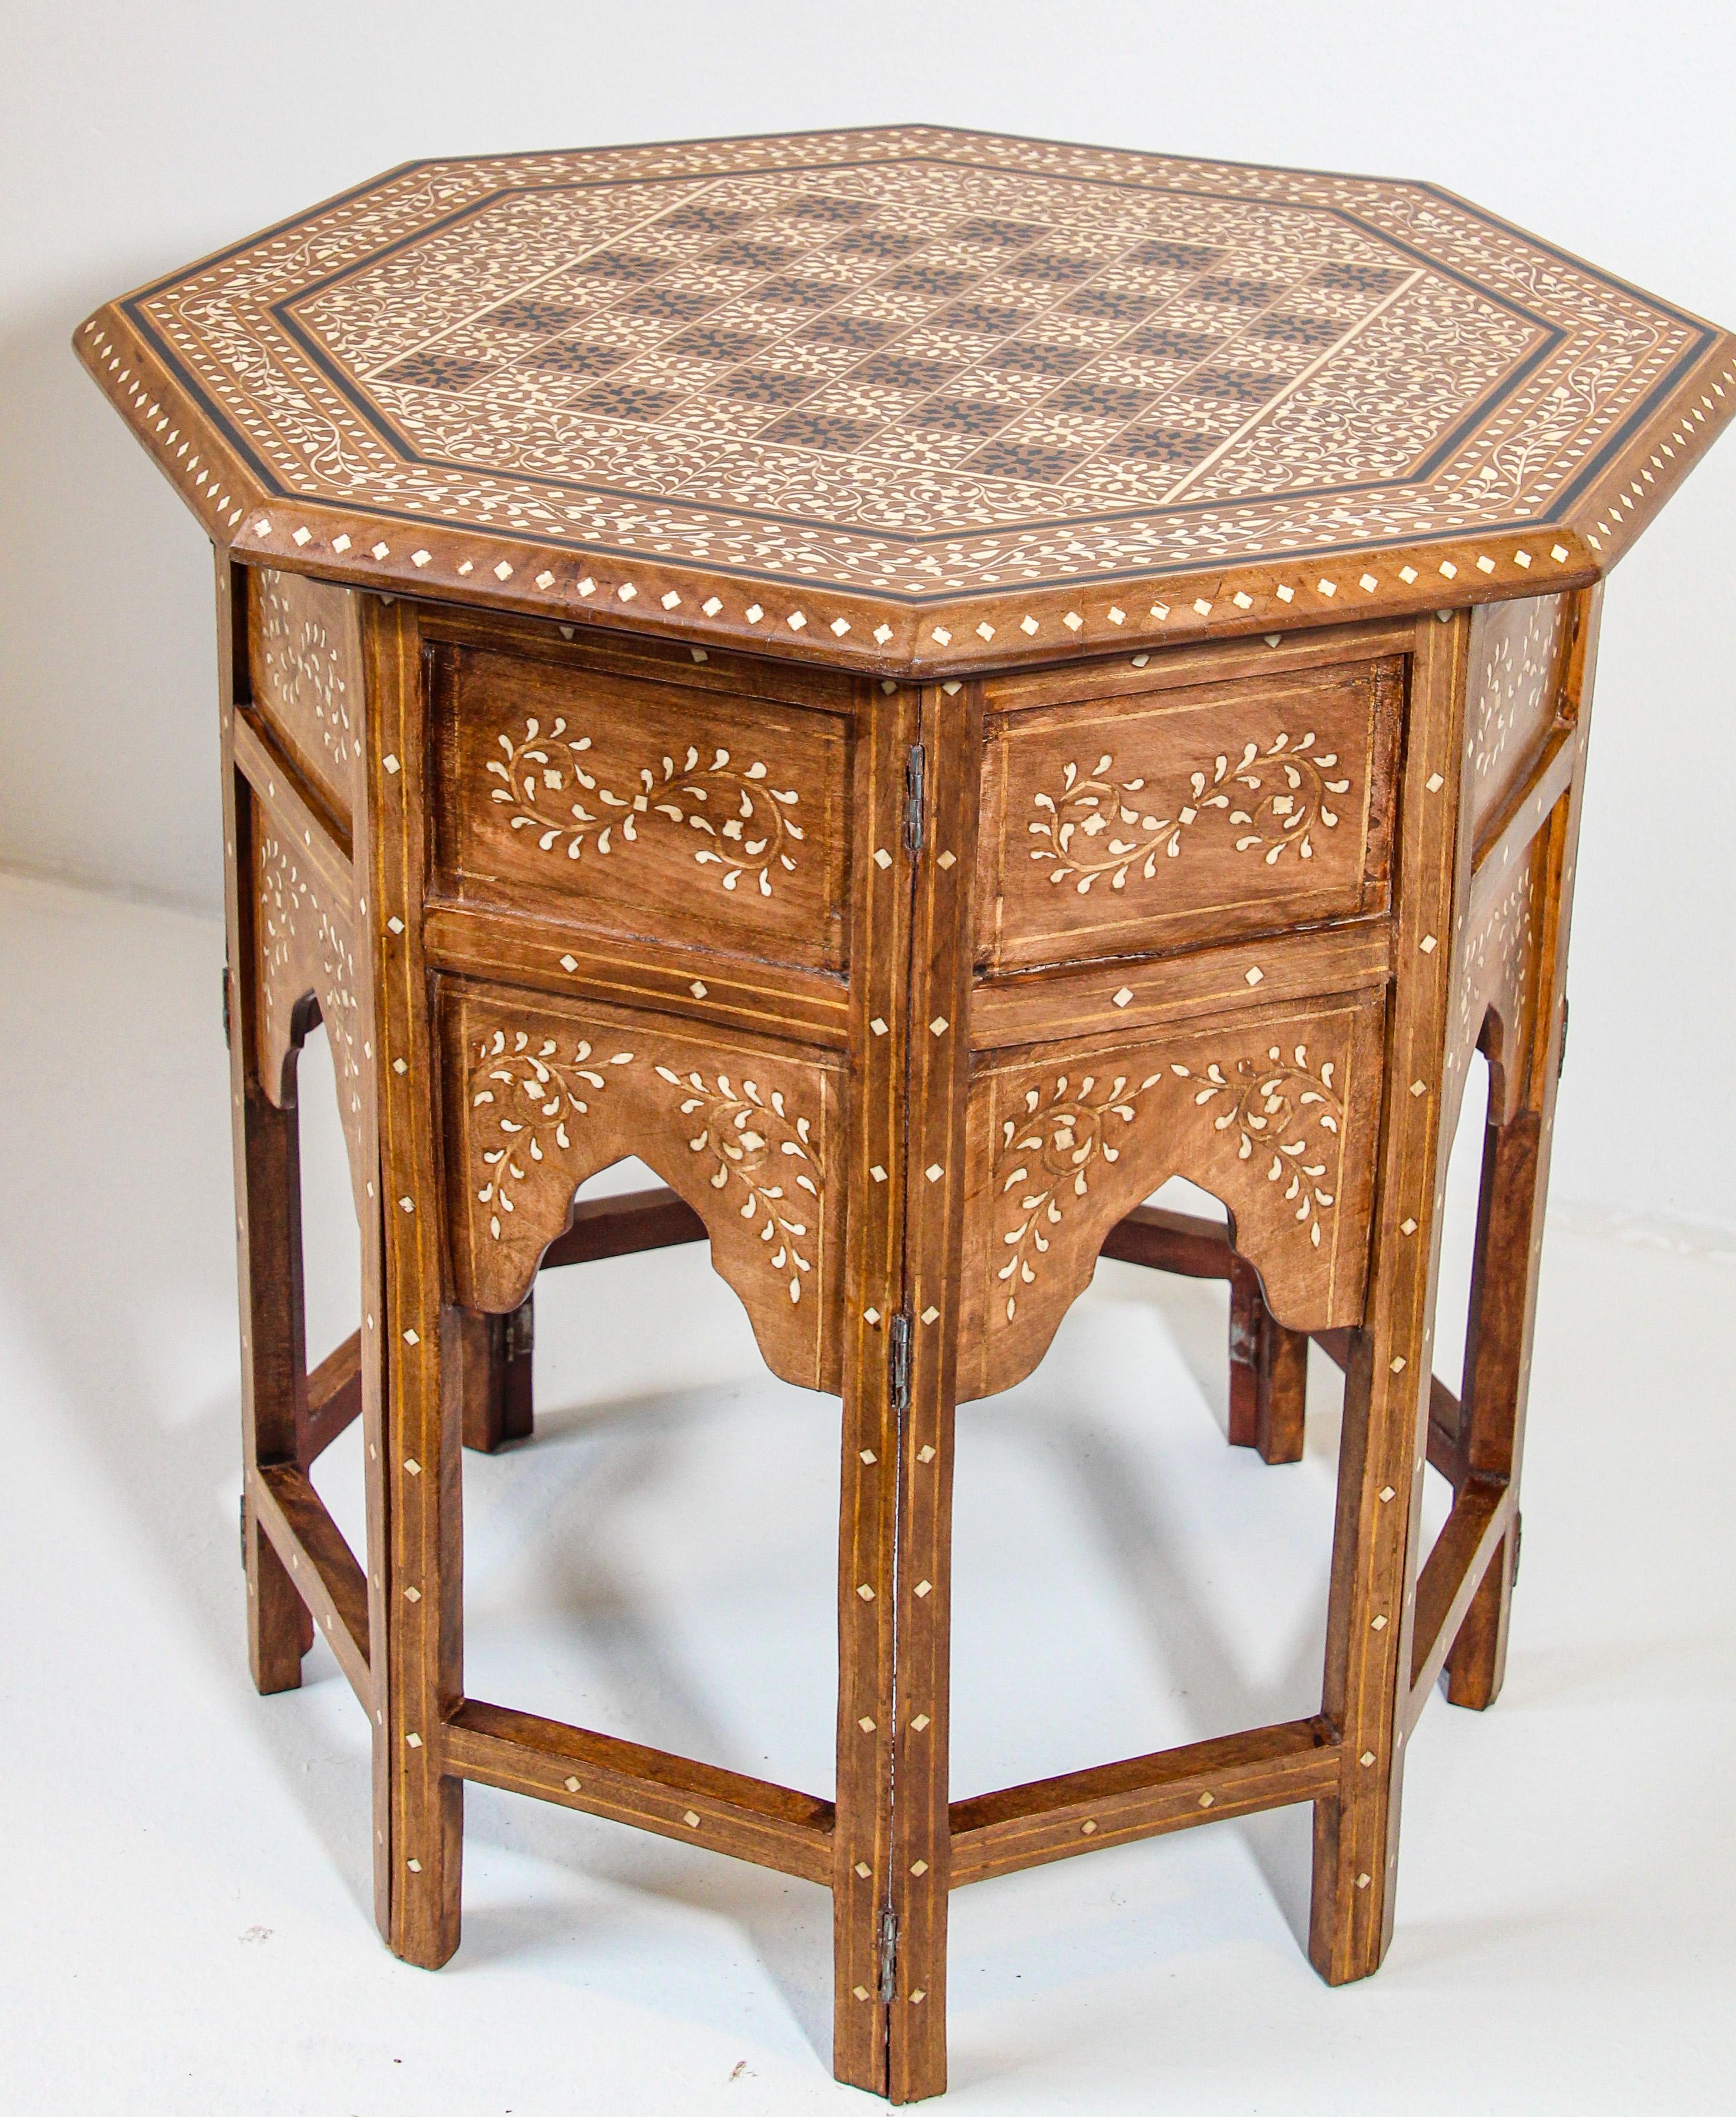 Anglo-Indian Octagonal Mughal Moorish Chess Game Table with Inlay India 1